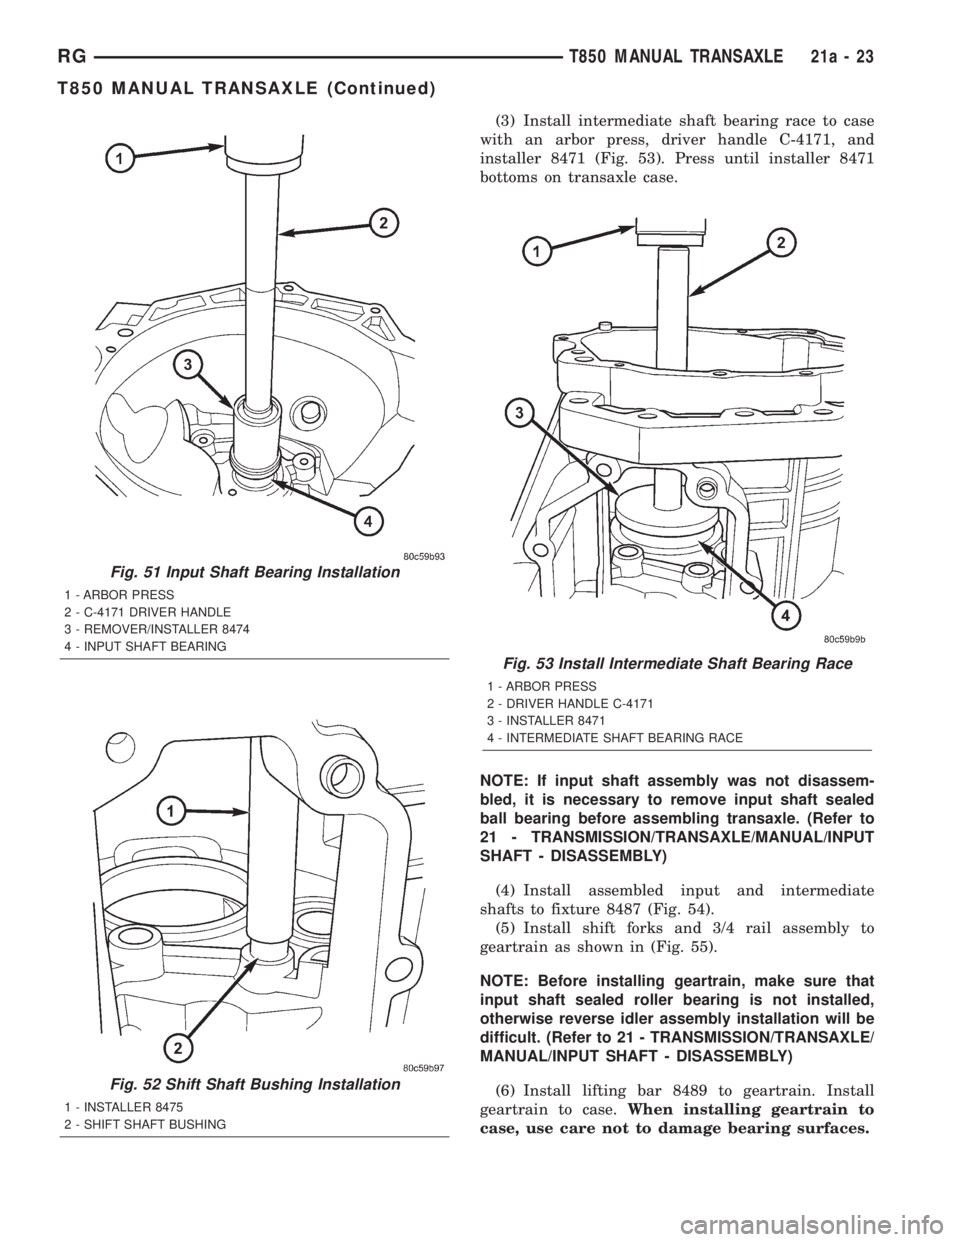 CHRYSLER VOYAGER 2001  Service Manual (3) Install intermediate shaft bearing race to case
with an arbor press, driver handle C-4171, and
installer 8471 (Fig. 53). Press until installer 8471
bottoms on transaxle case.
NOTE: If input shaft 